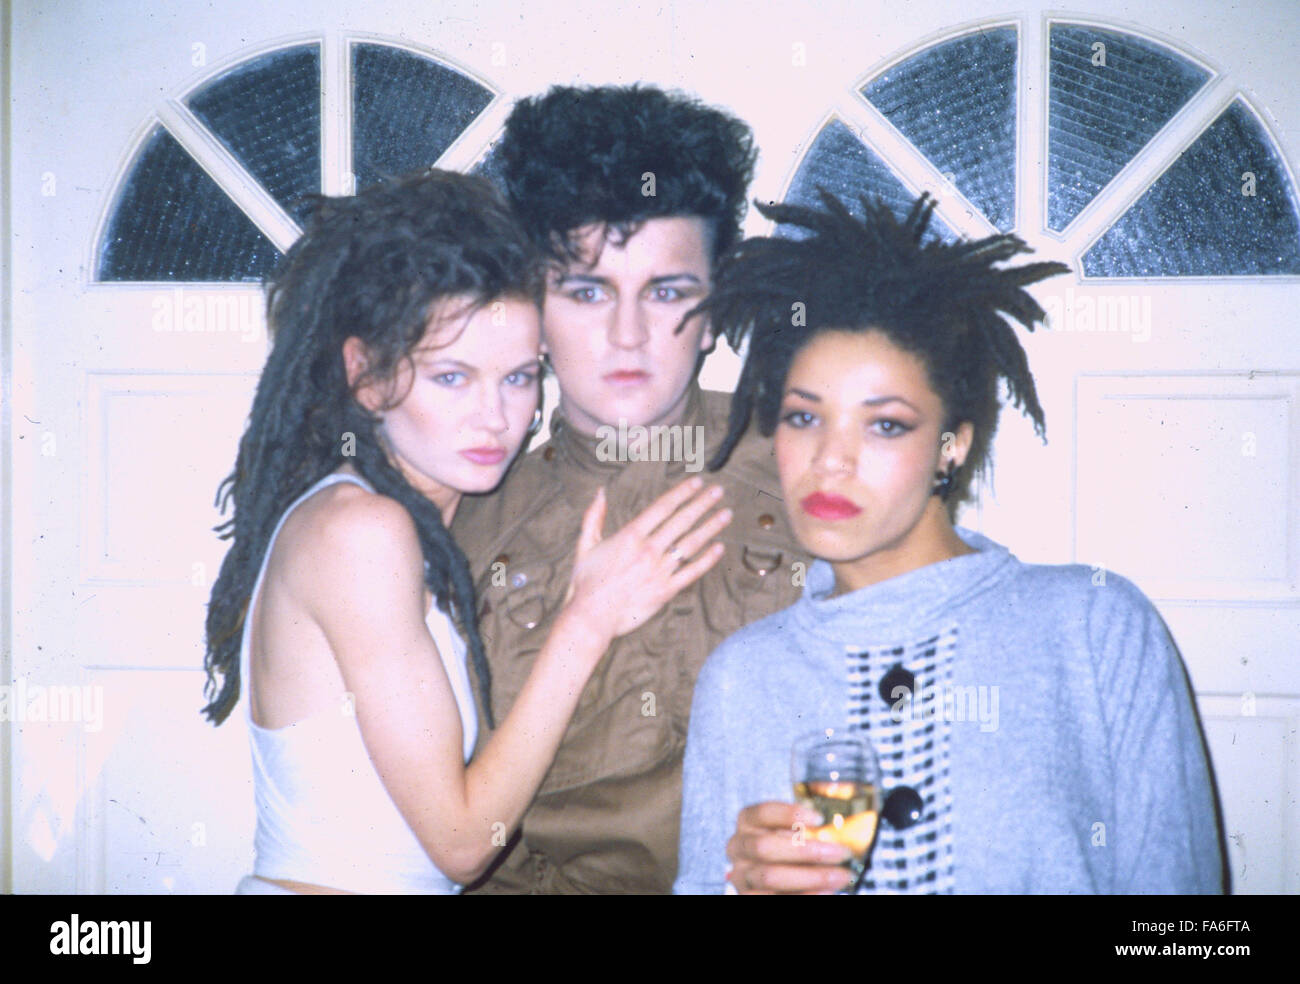 London.UK. Steve Strange (born Steven John Harrington) with Kate Garner  from Haysi Fantayzee and Jennie Matthias from The Belle Stars at the Camden  Palace in about 1982. ReCaptioned 13.2.2015 with news of